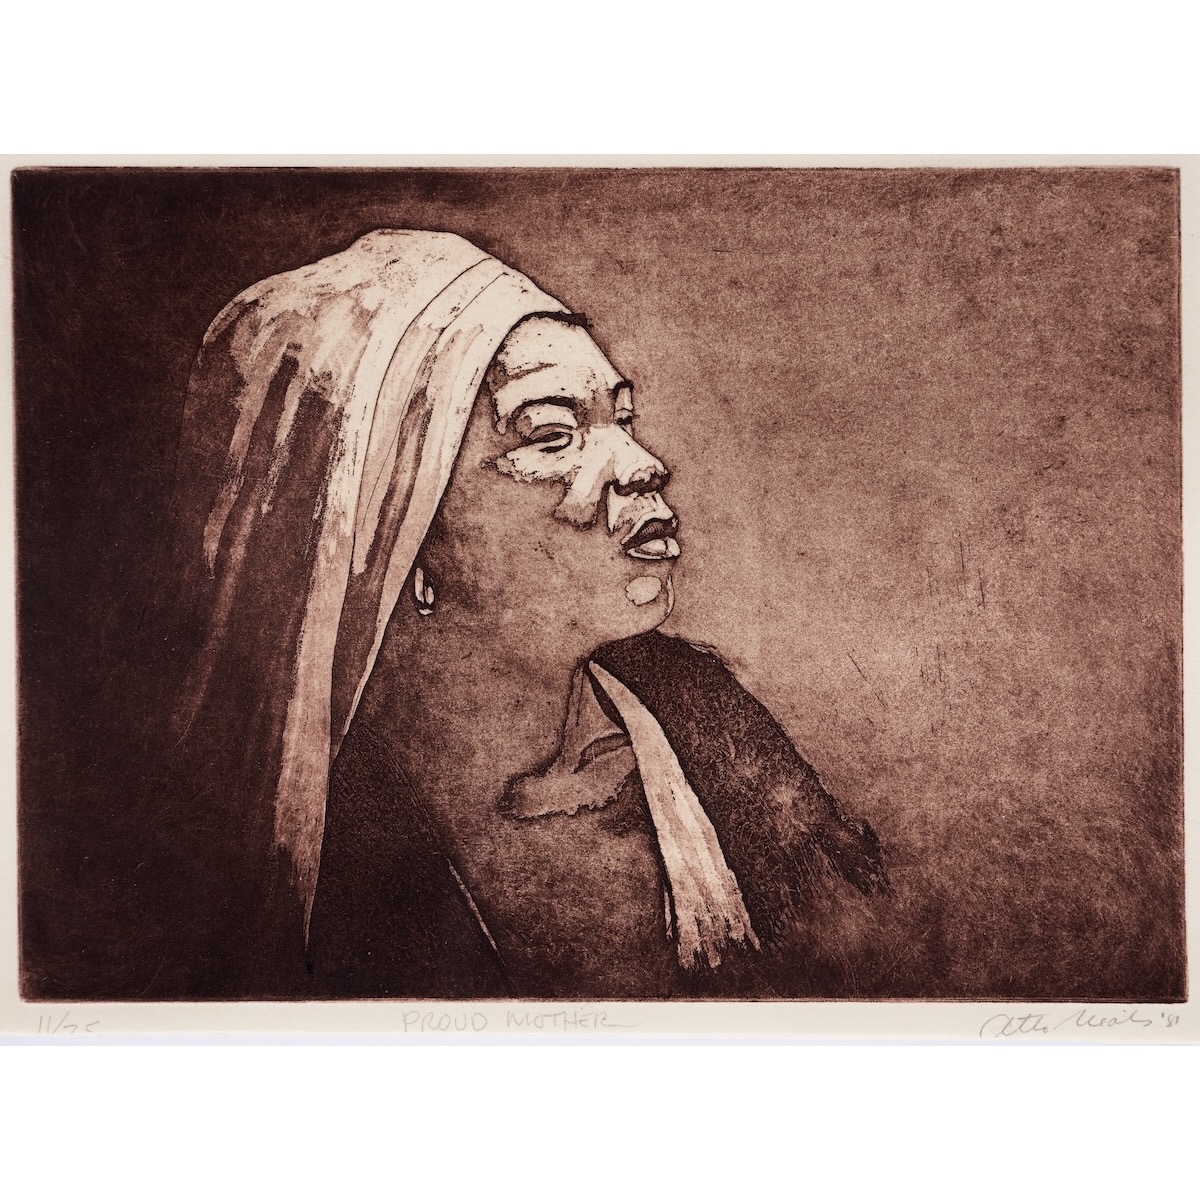 Image of an etching and aquatint print of a woman in profile by the artist Otto Neals